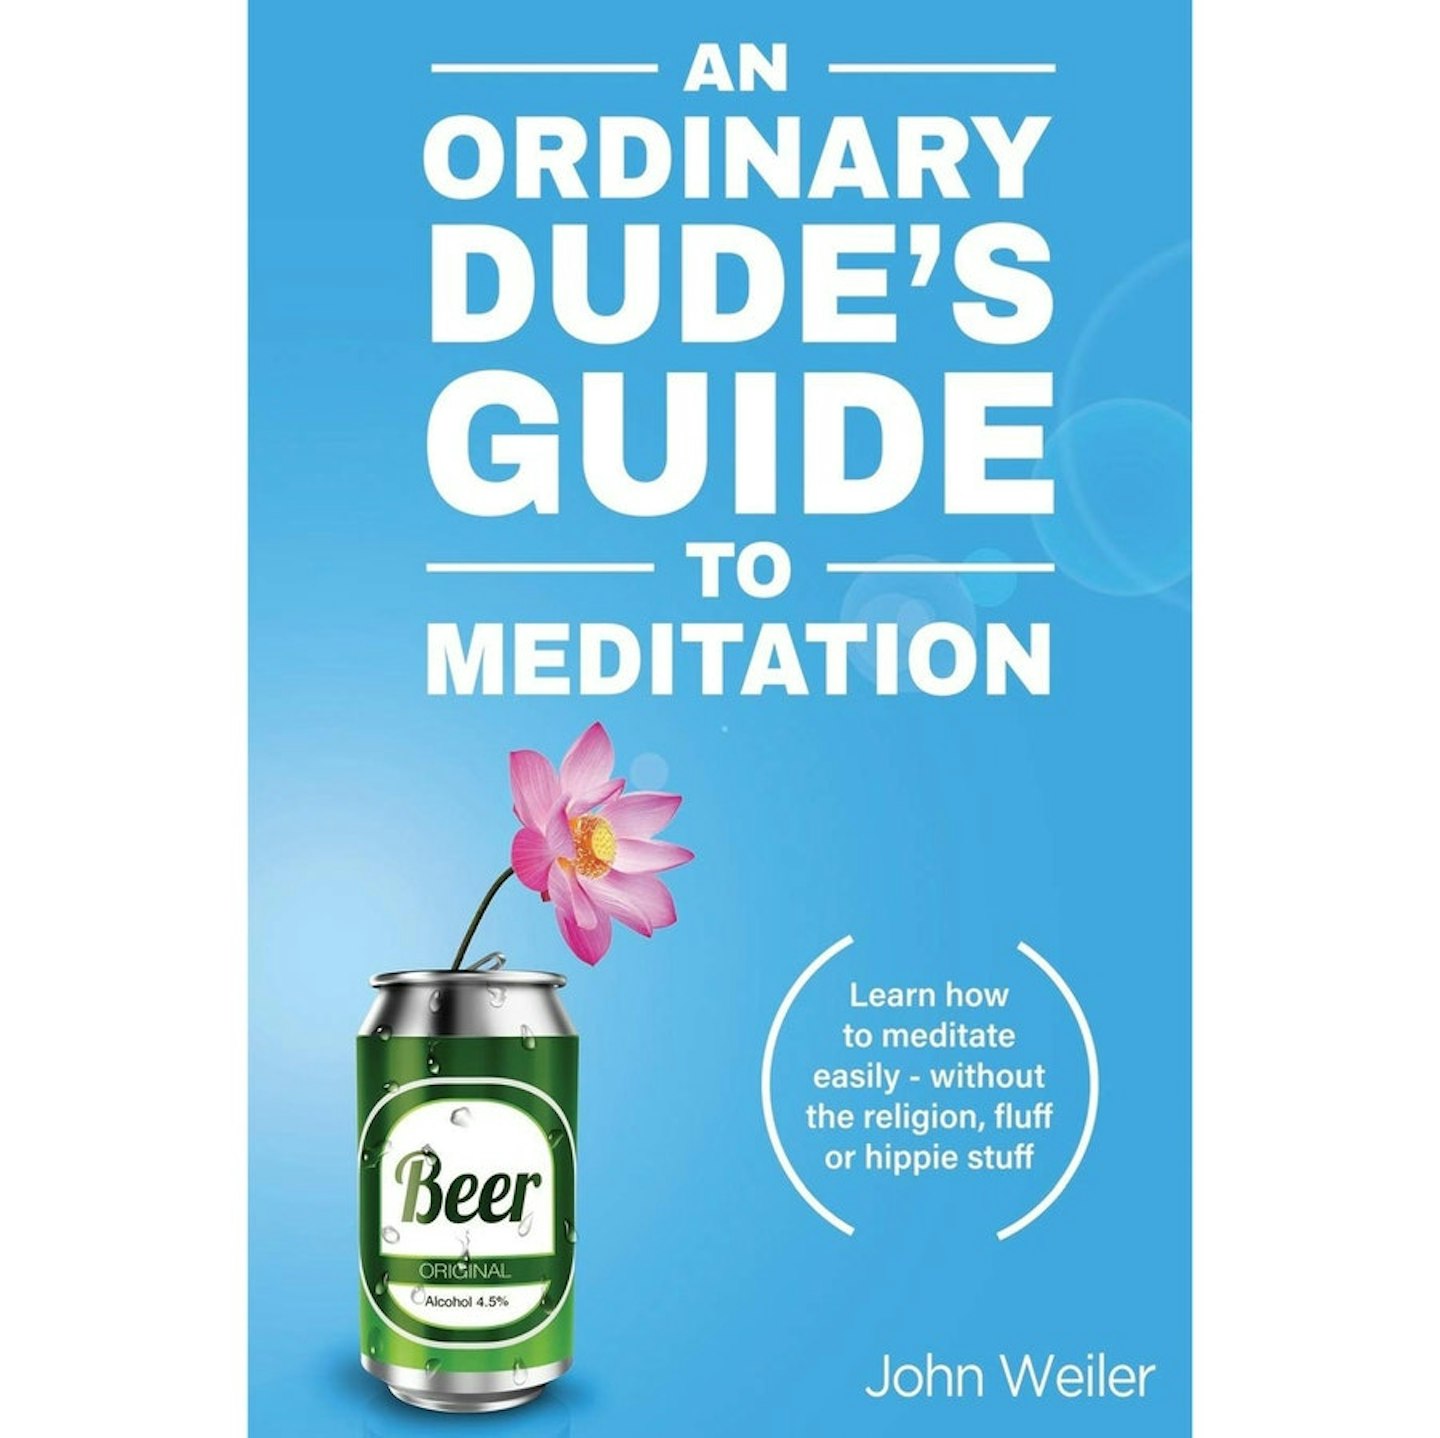 An Ordinary Dude’s Guide to Meditation by John Weiler